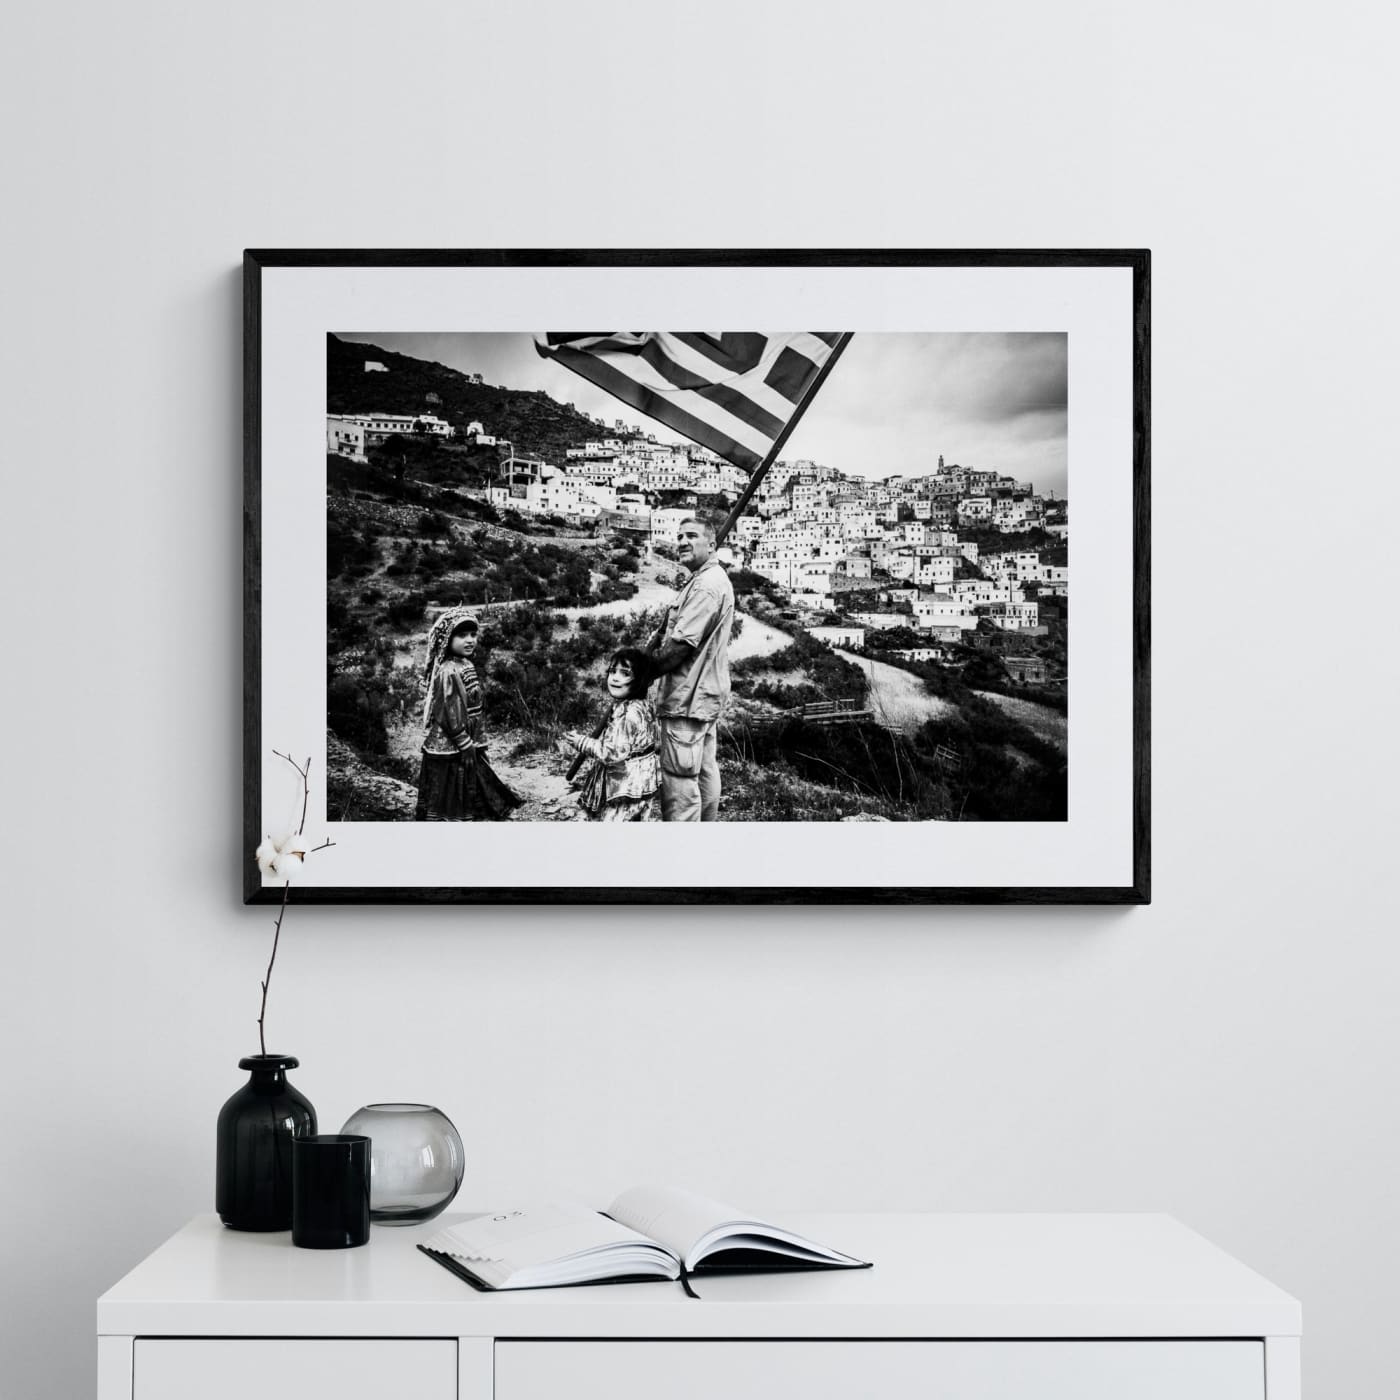 Black and White Photography Wall Art Greece | Carrying the Greek flag in Olympos Karpathos Dodecanese by George Tatakis - single framed photo